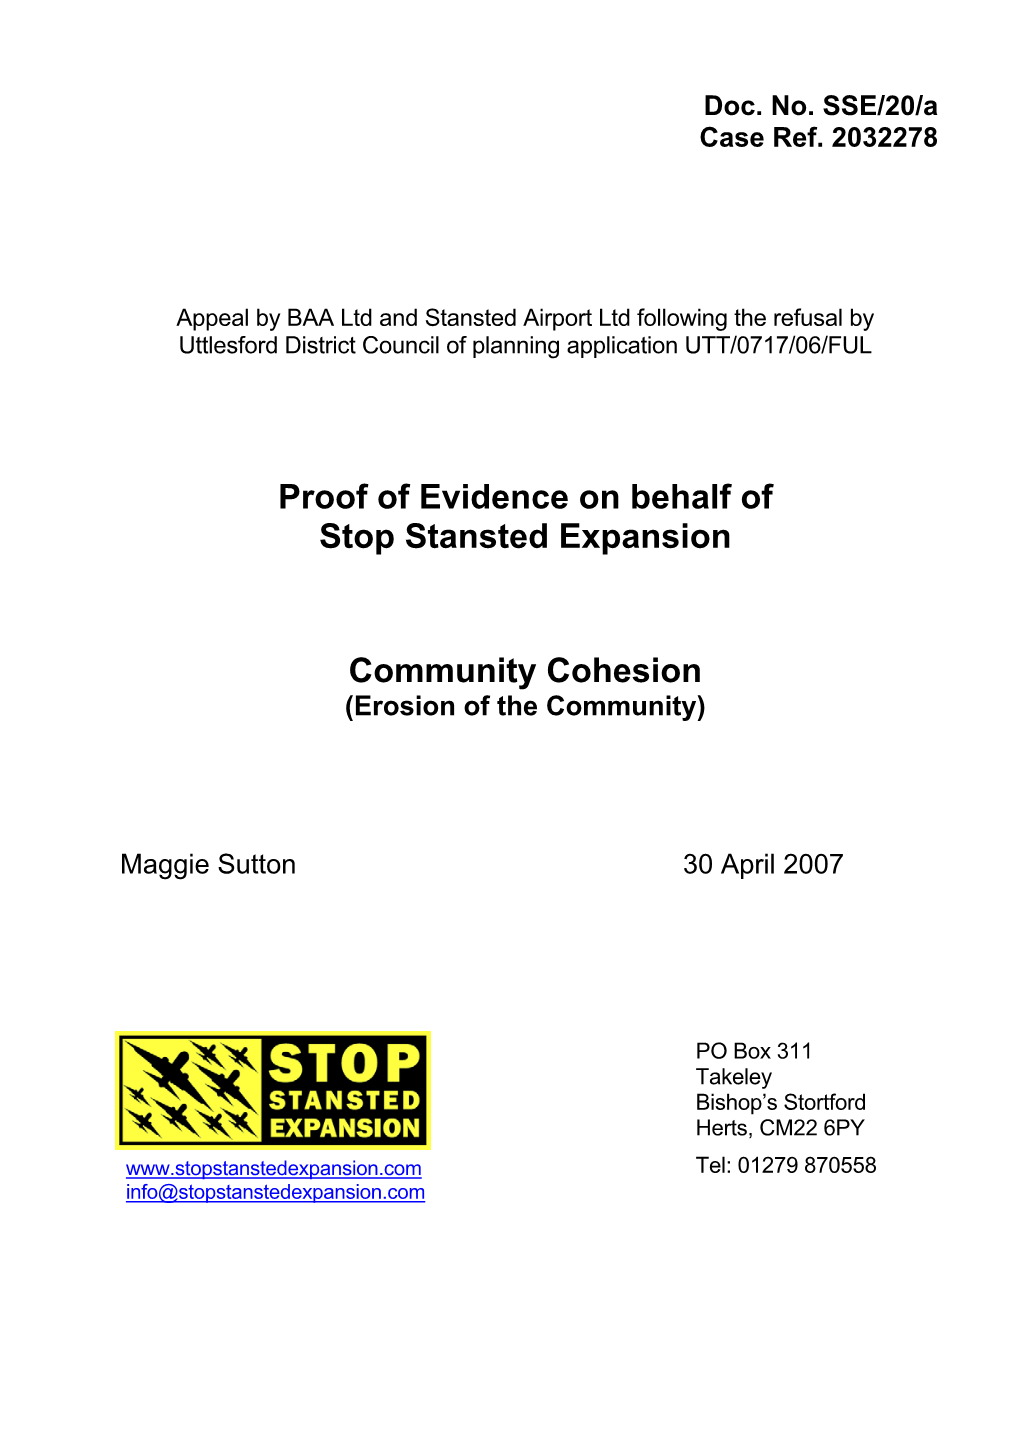 Proof of Evidence on Behalf of Stop Stansted Expansion Community Cohesion